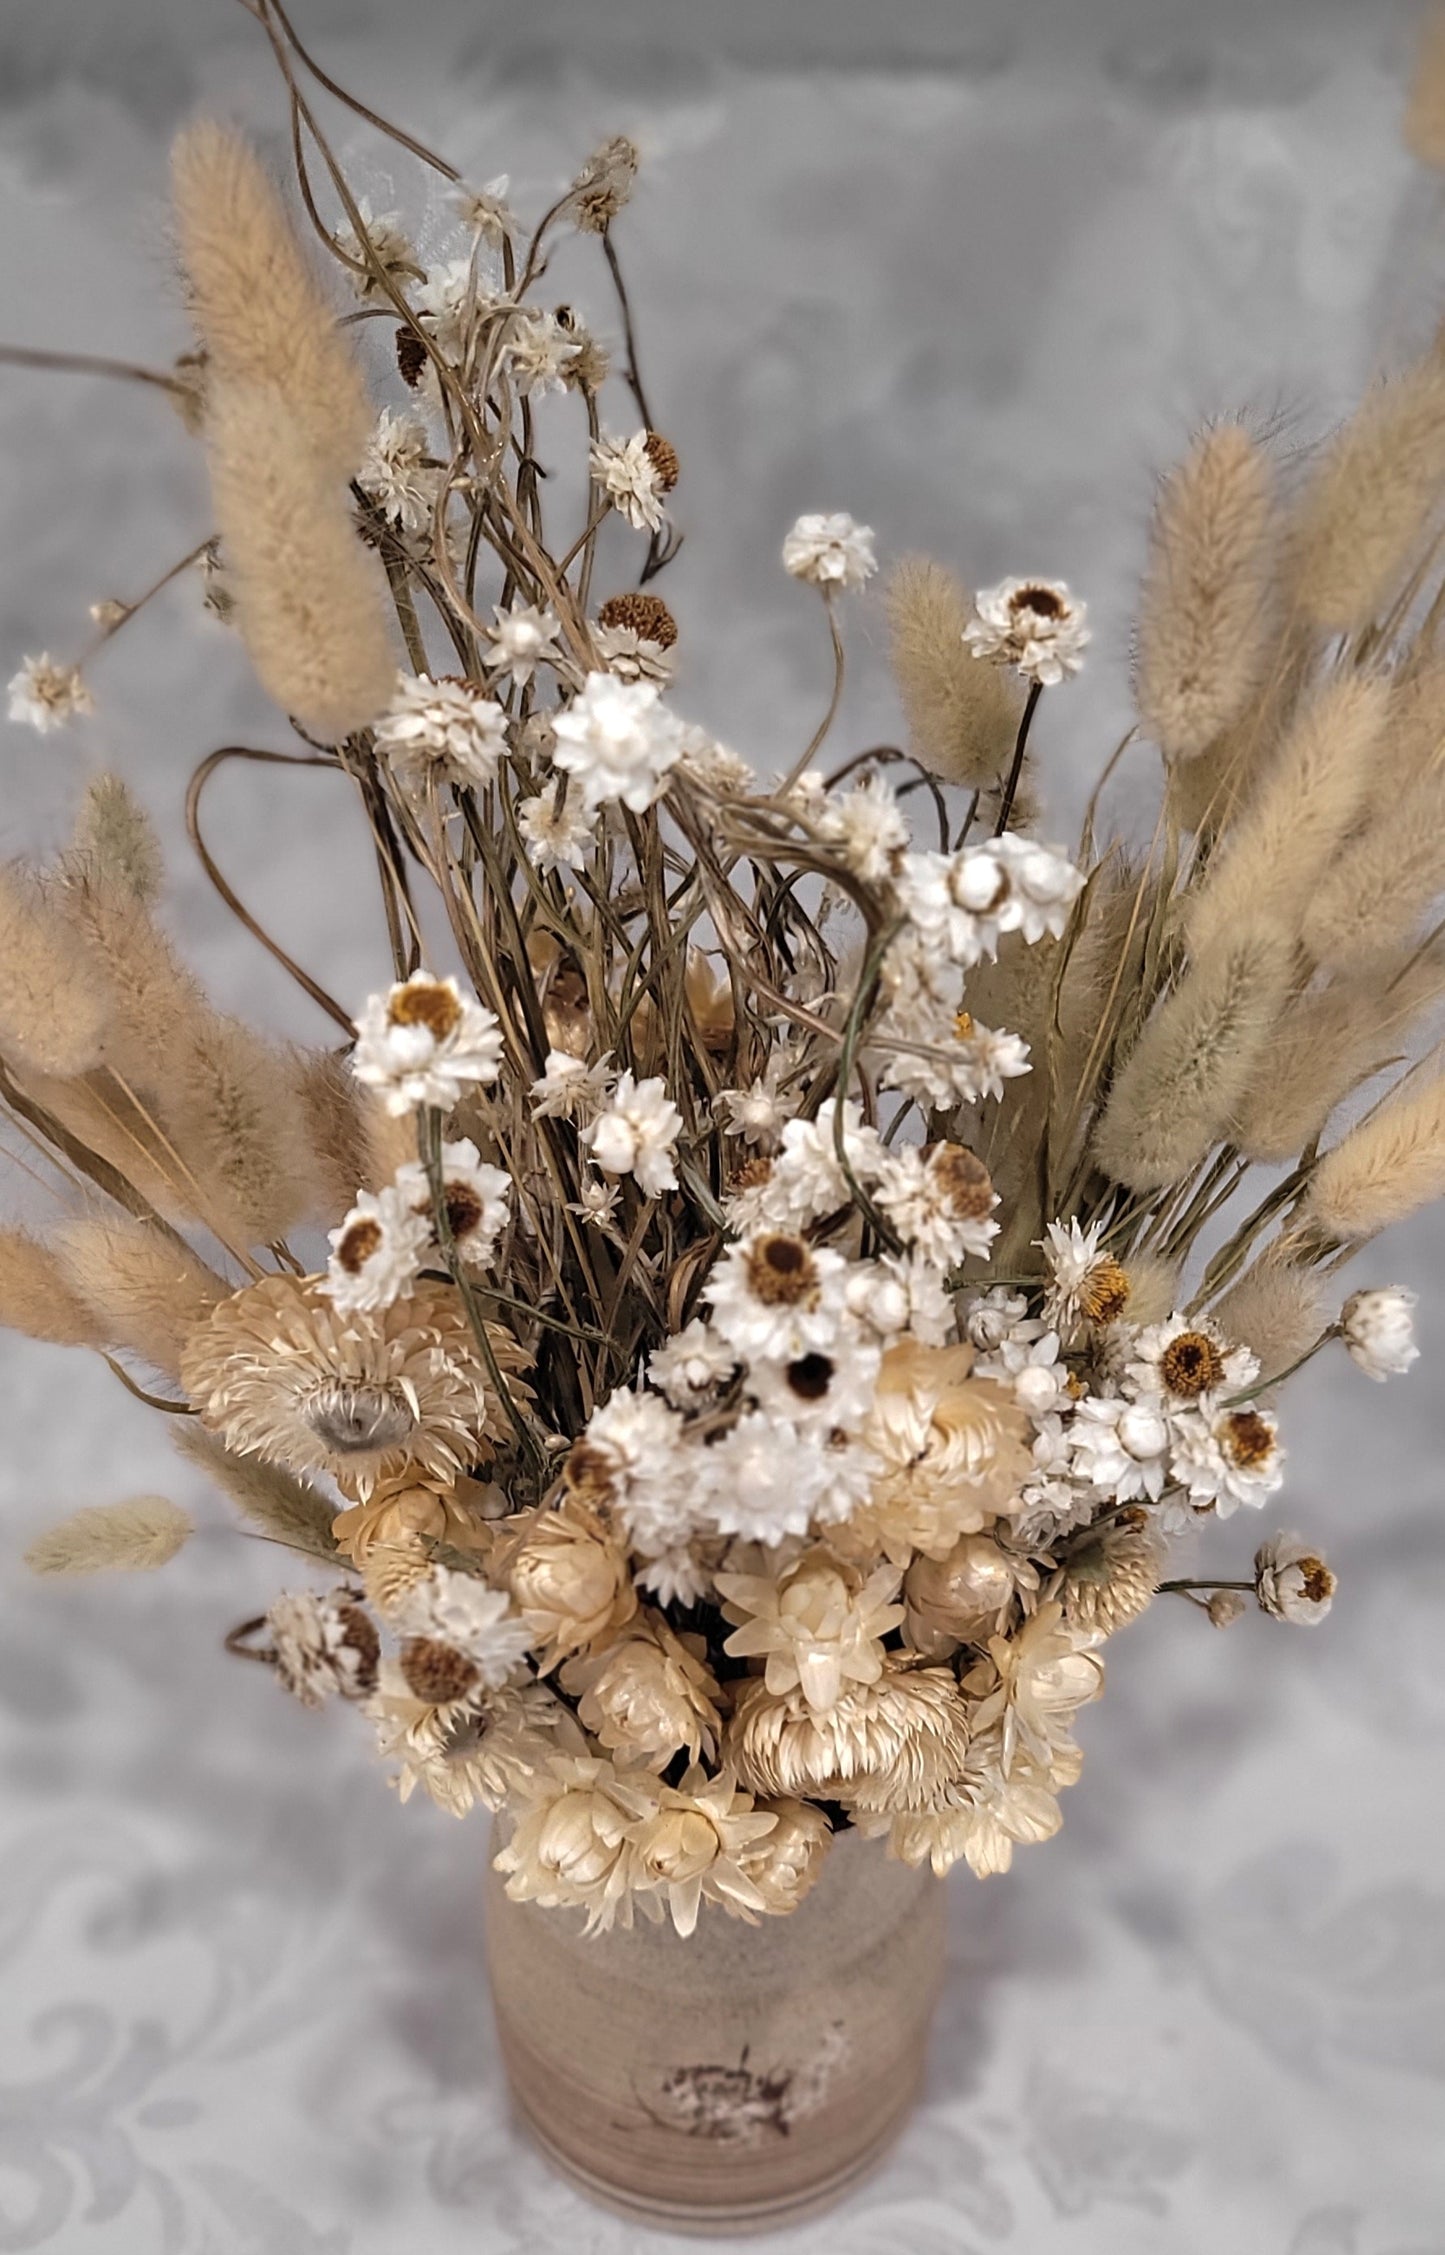 Dried flowers in a ceramic vase